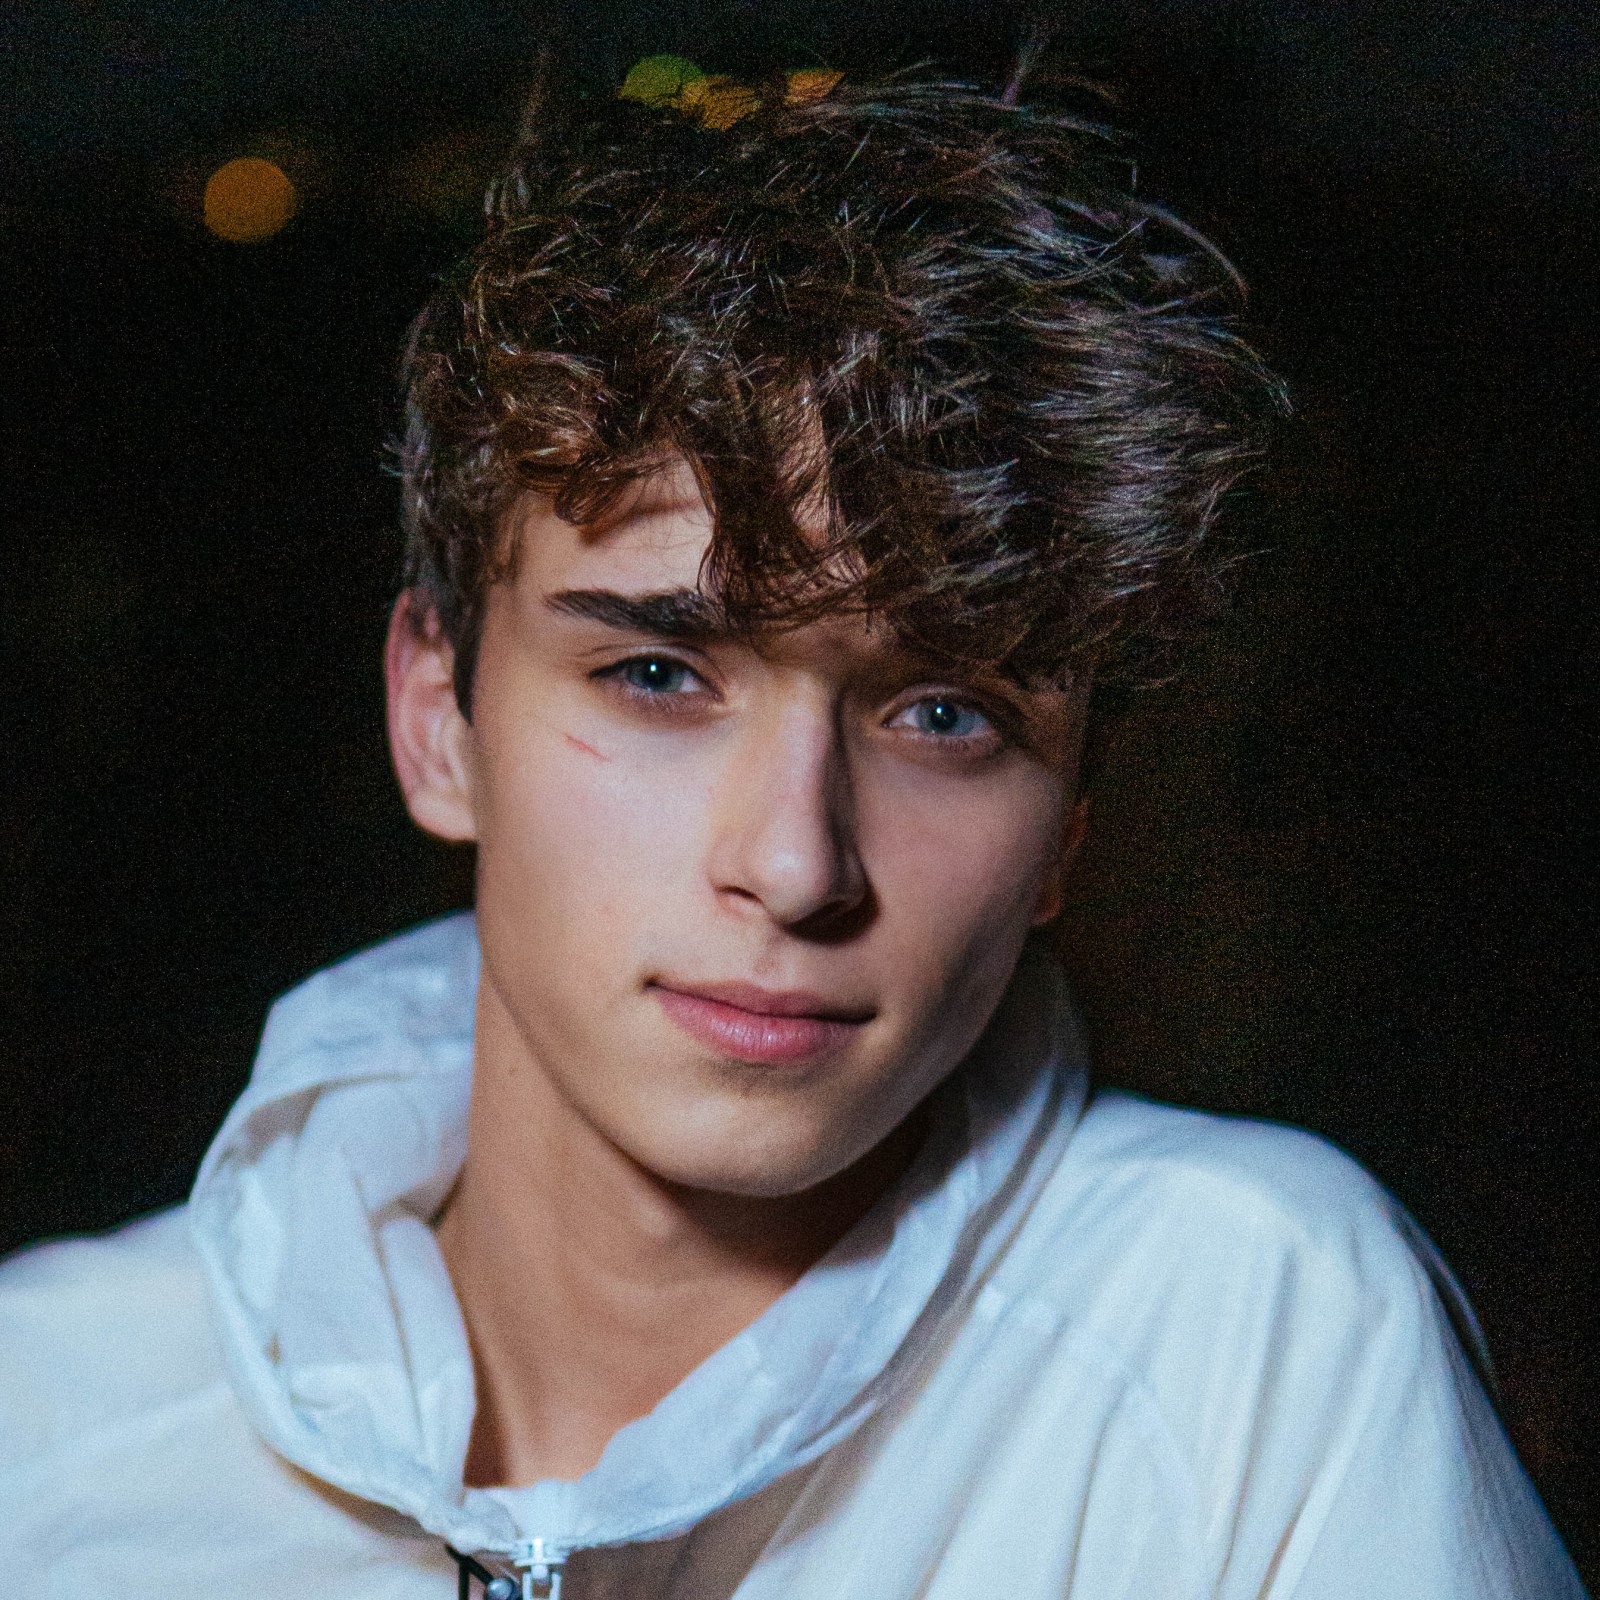 Josh Richards Is More Than Just a TikTok Star, He's a Mogul in the Making